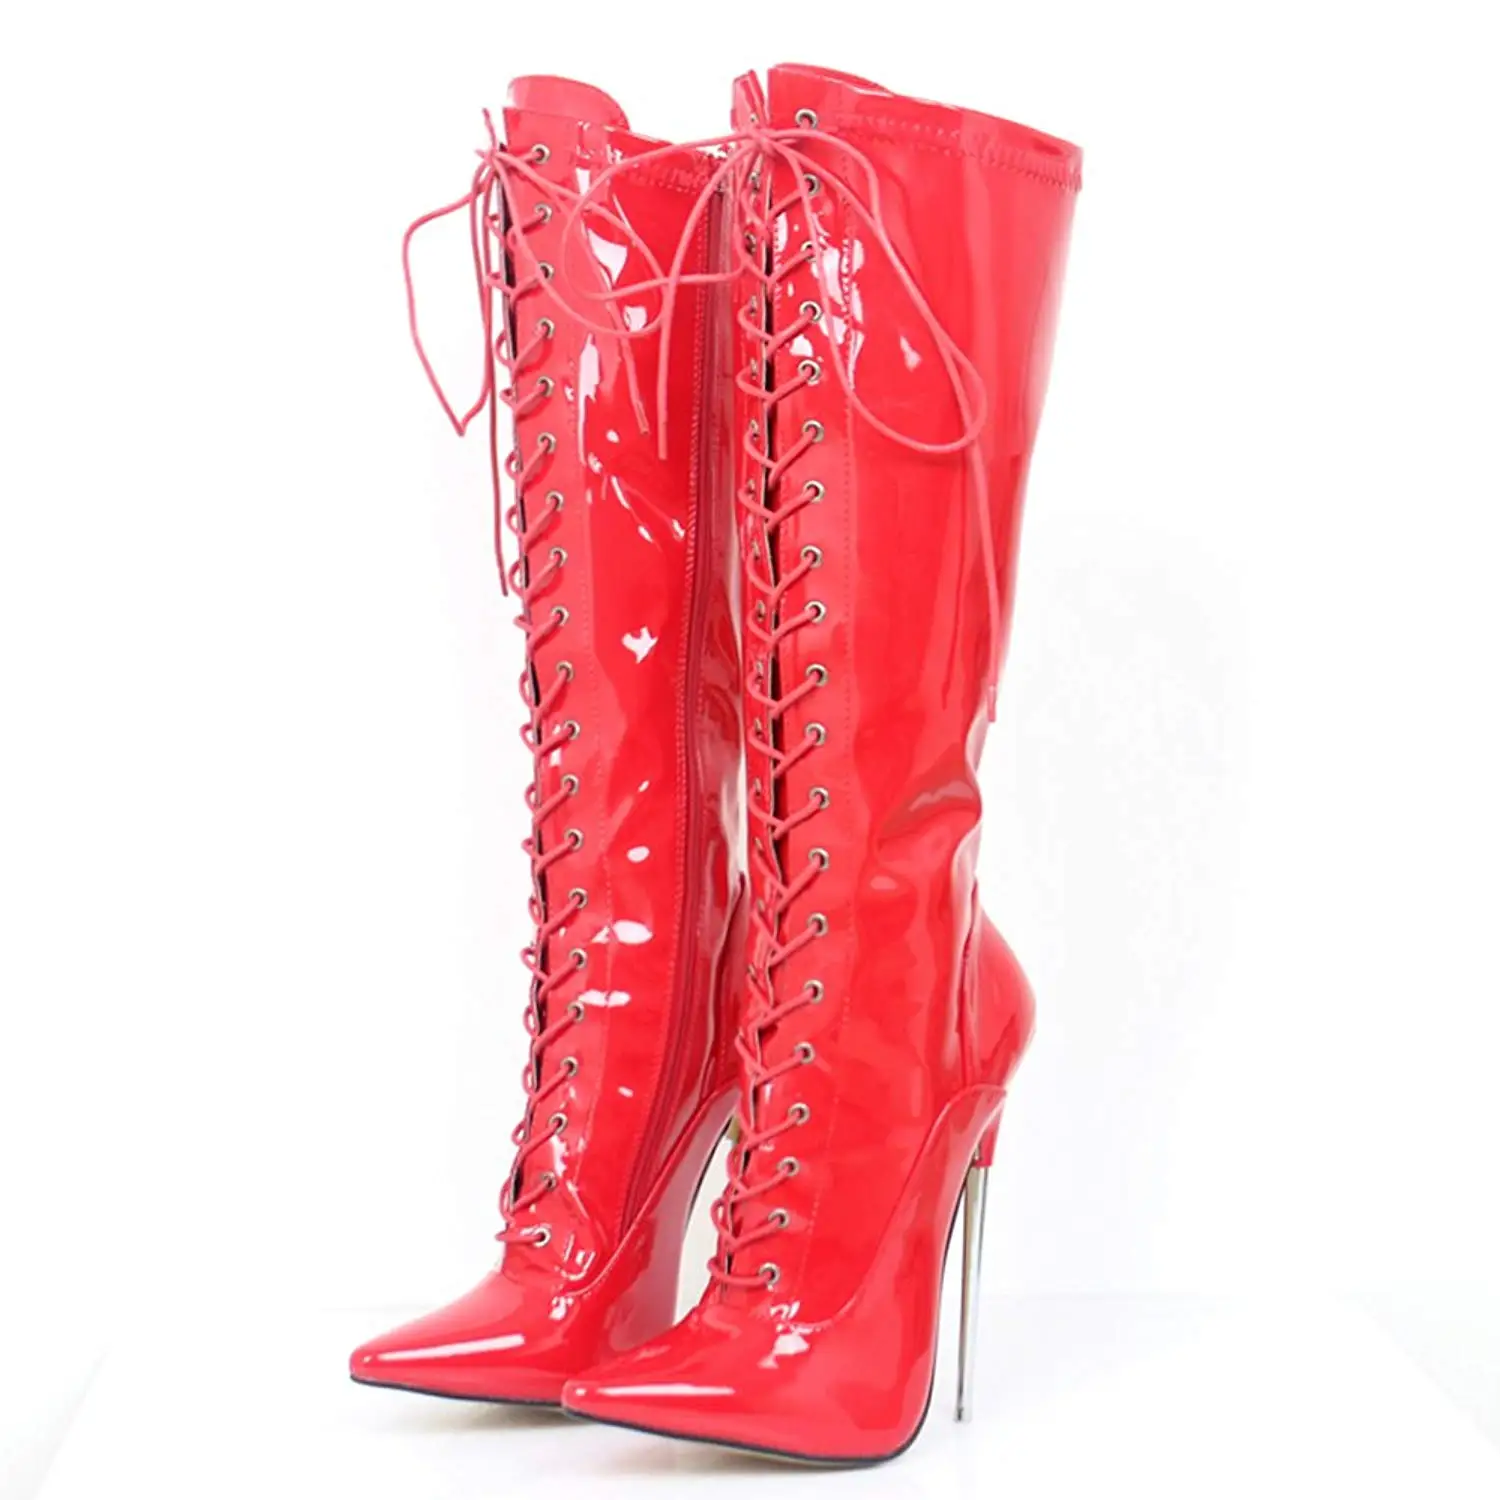 Cheap Fetish Boots Find Fetish Boots Deals On Line At